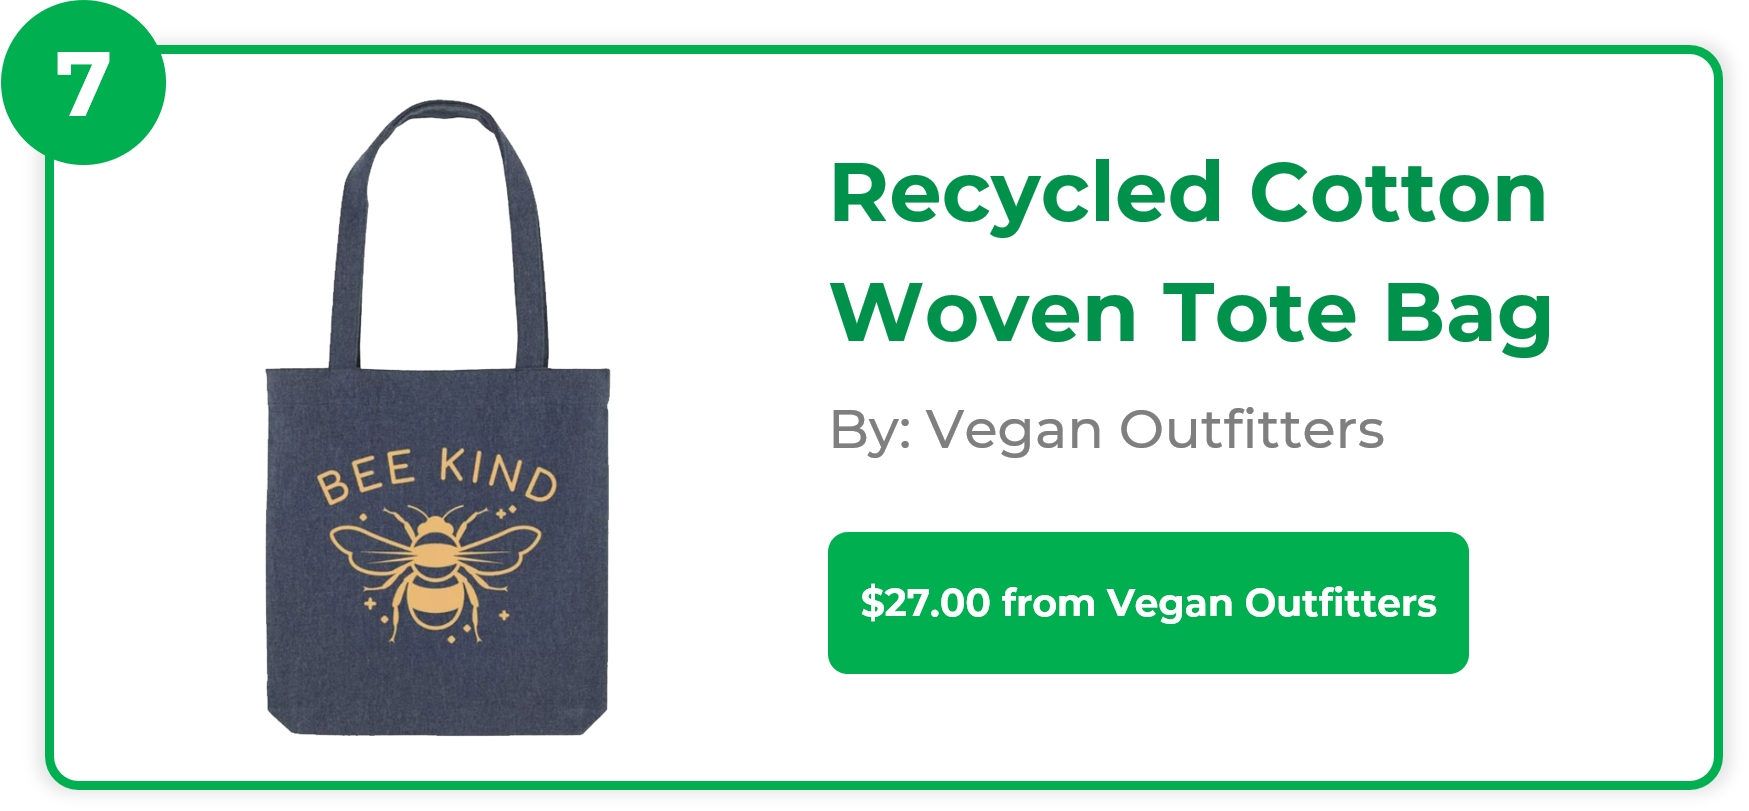 Recycled Cotton Woven Tote Bag - Vegan Outfitters